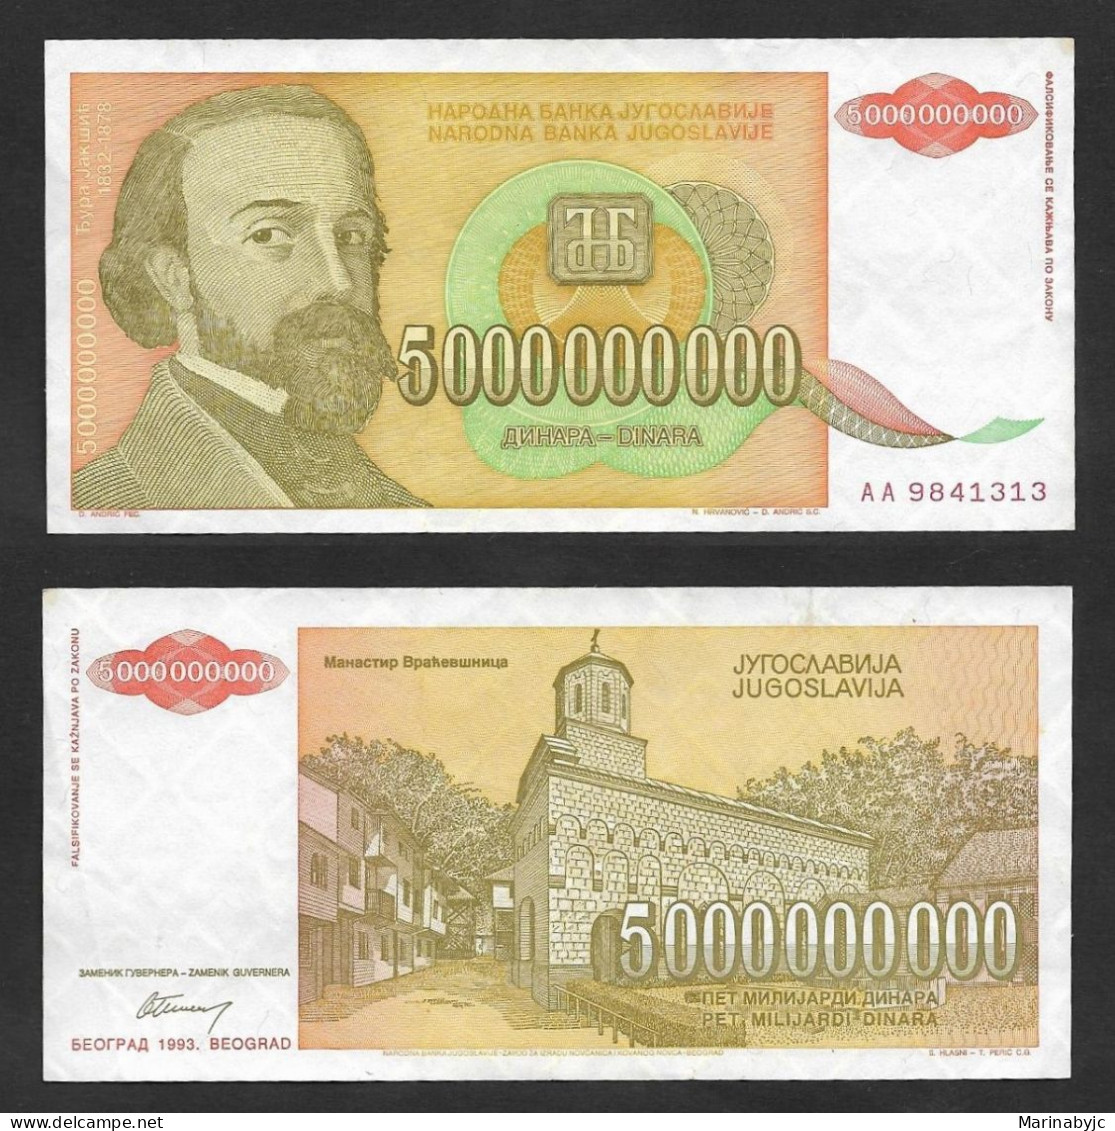 SE)1993 YUGOSLAVIA, BANKNOTE OF 5,00,000,000 DINARS OF THE CENTRAL BANK OF YUGOSLAVIA, WITH REVERSE, VF - Gebraucht